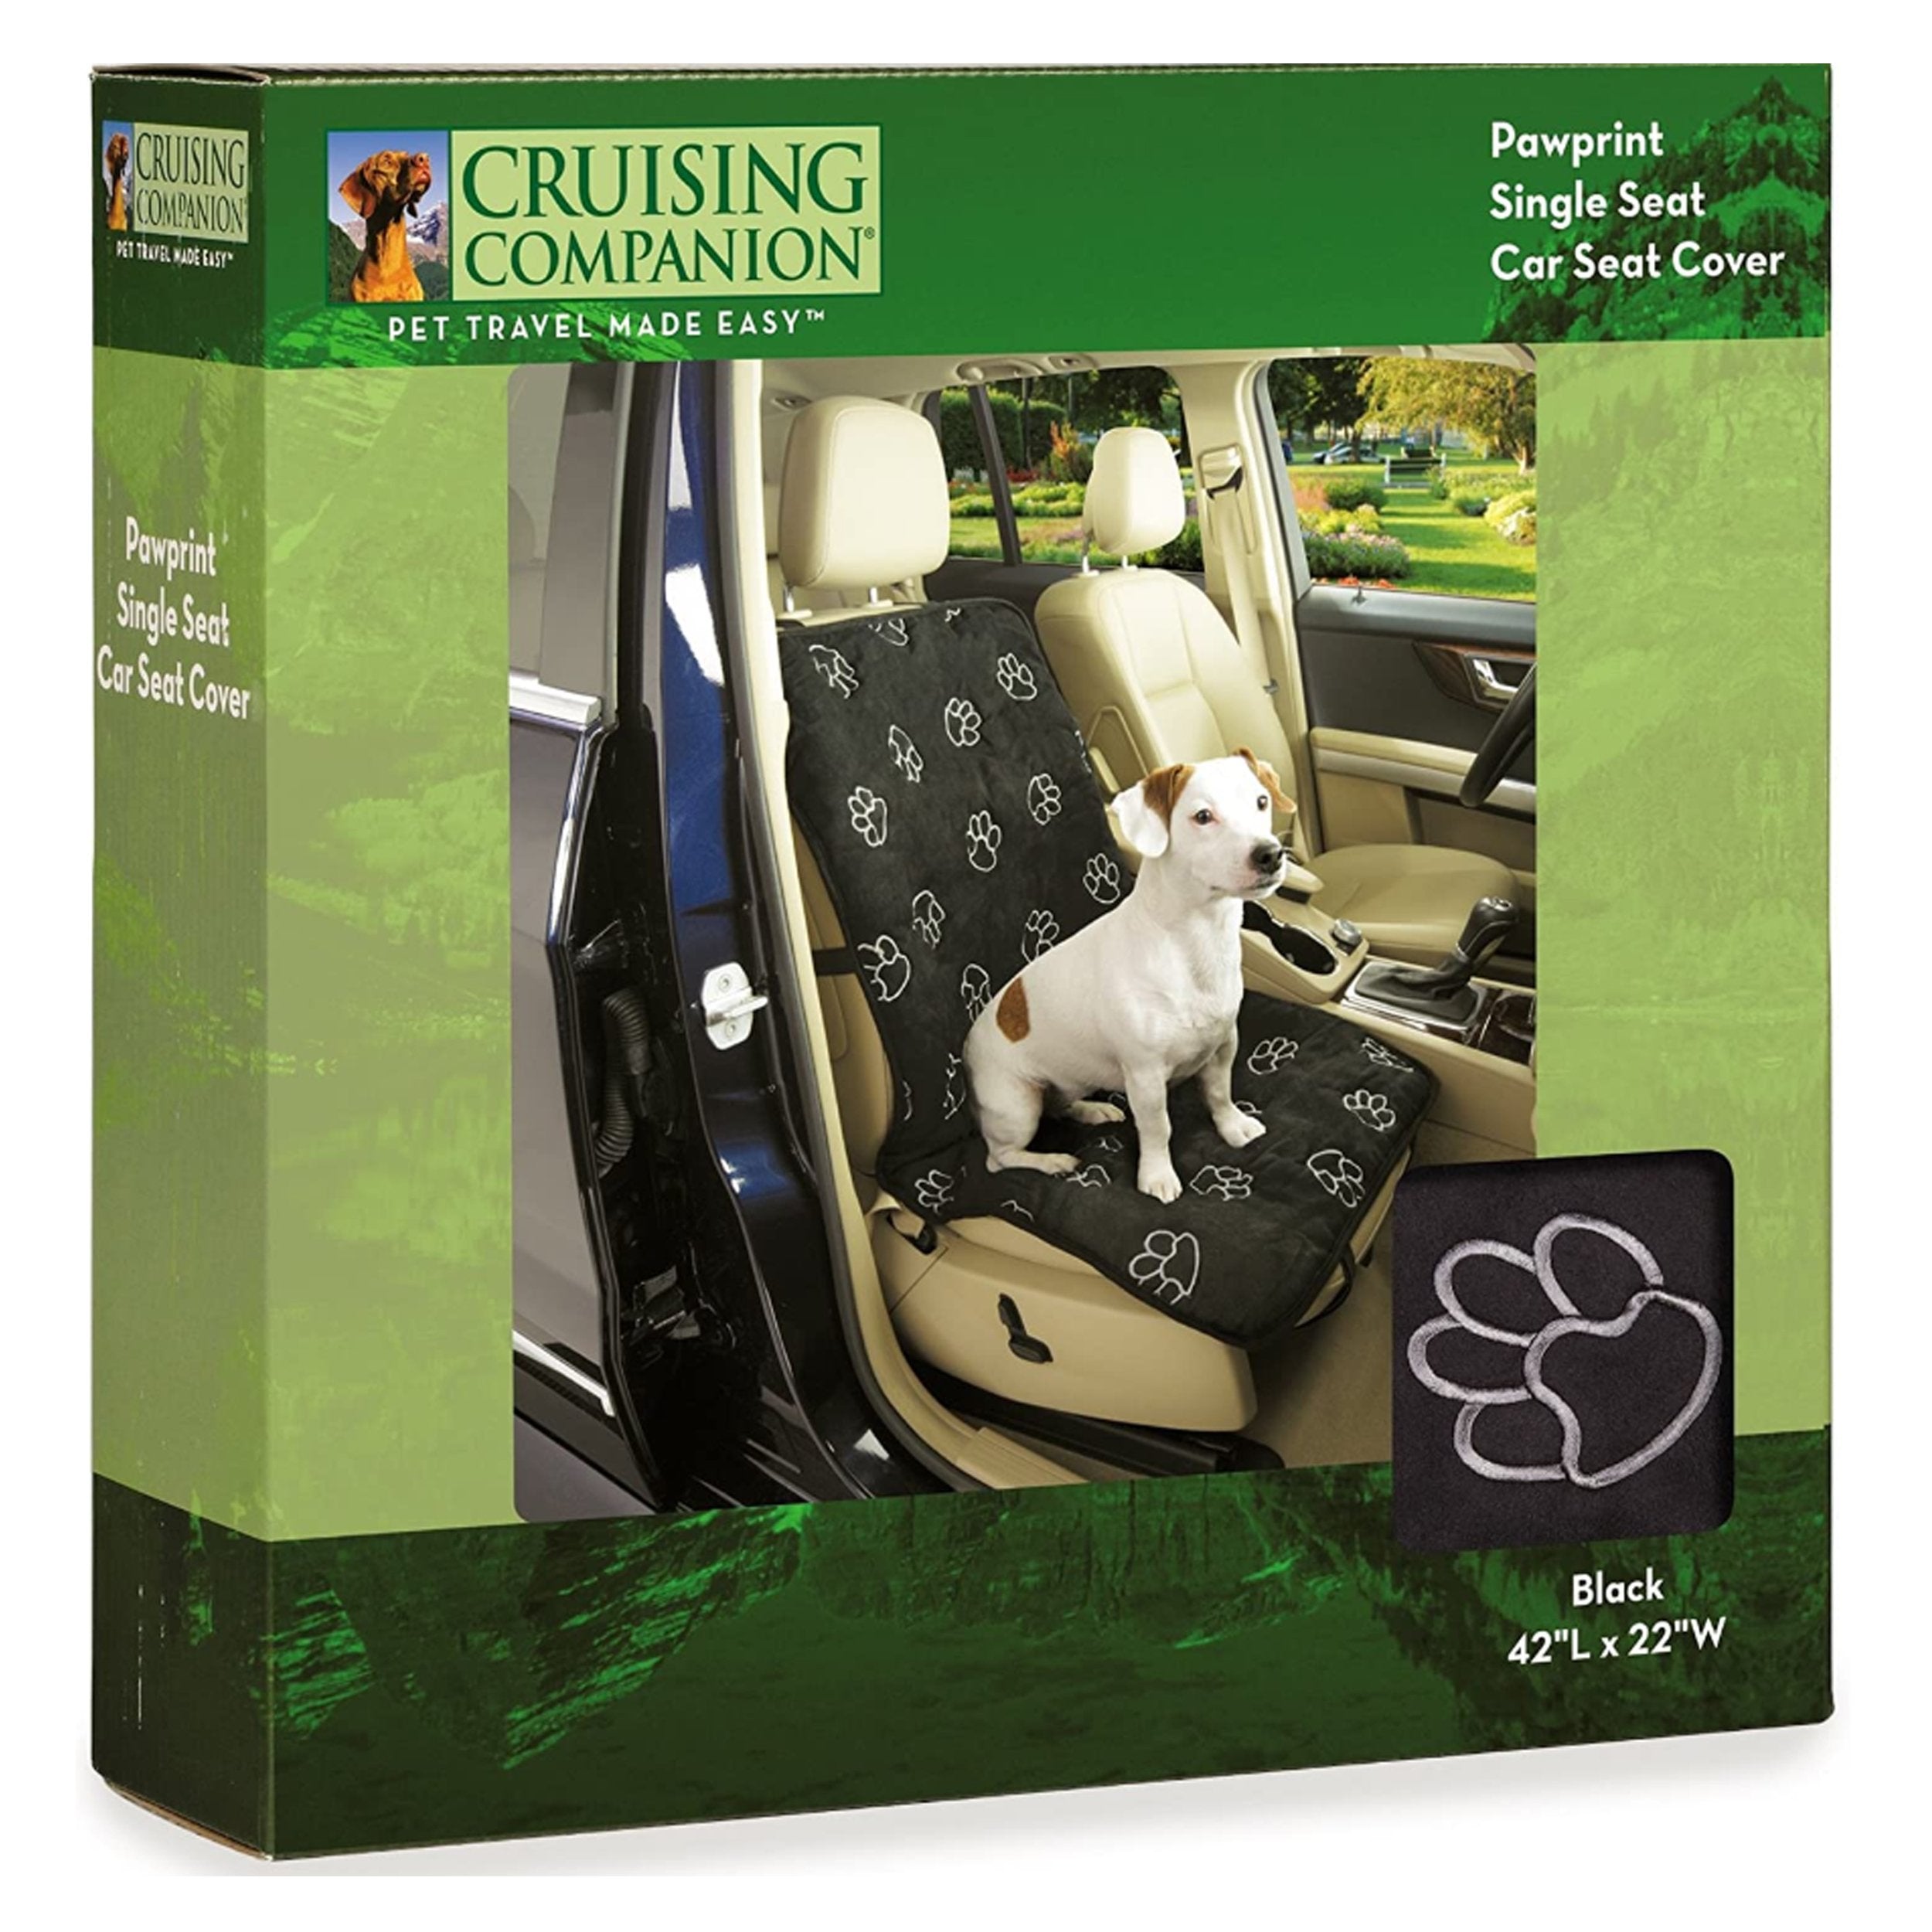 Cruising Companion Single Car Seat Cover Black with Vibrant white Paw Print Pattern for Travel with Dogs for No Messy Hair on seats